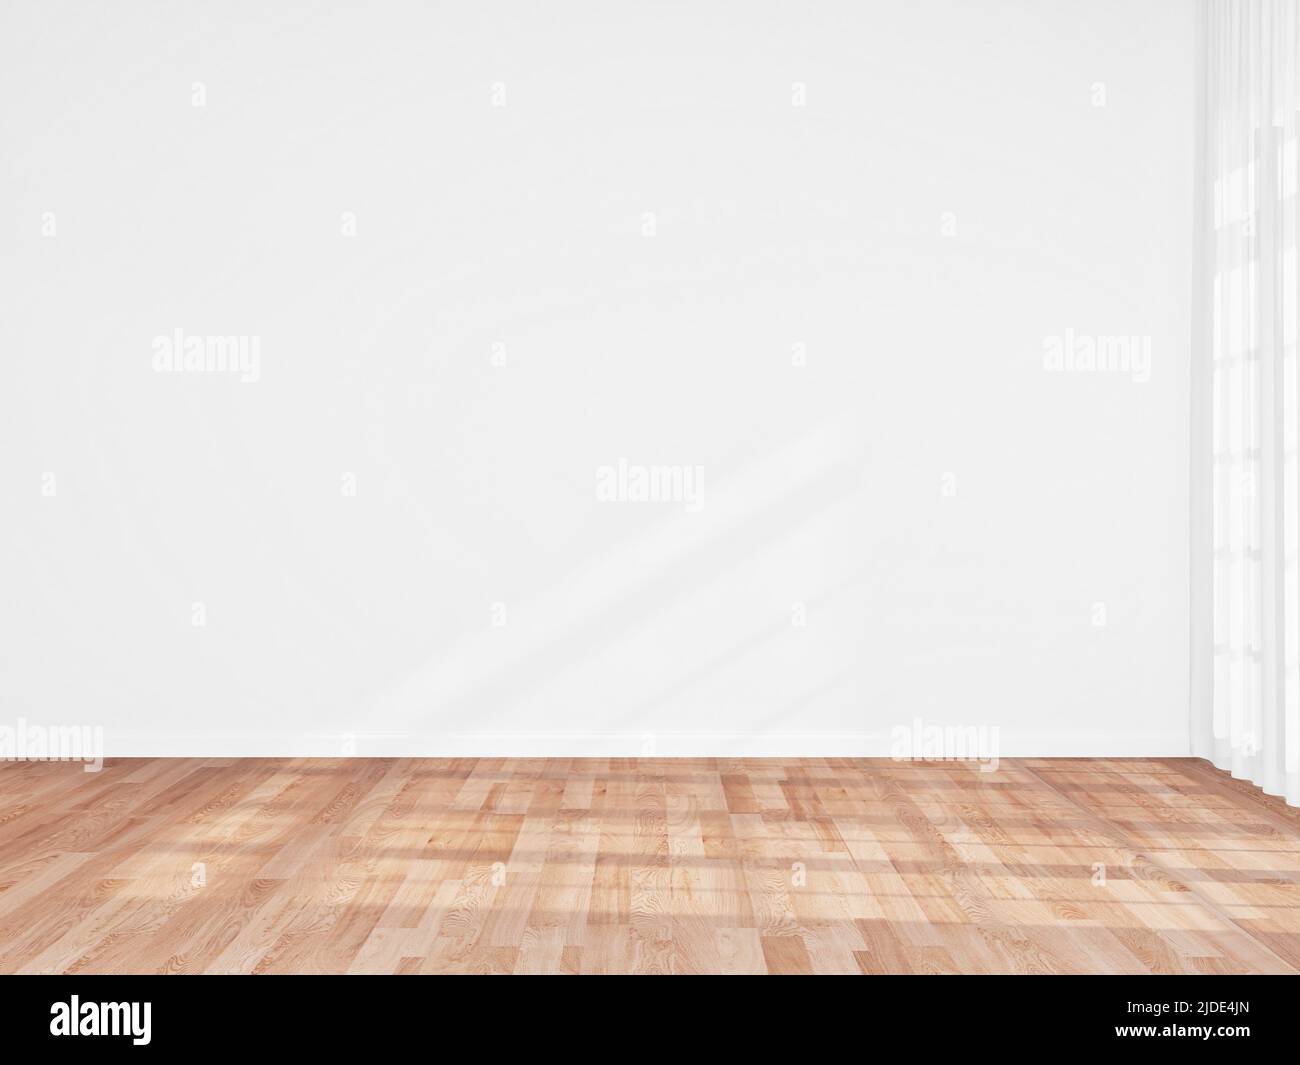 Blank white interior room Wall mockup background,empty white walls corner and white wood floor contemporary,3D rendering Stock Photo